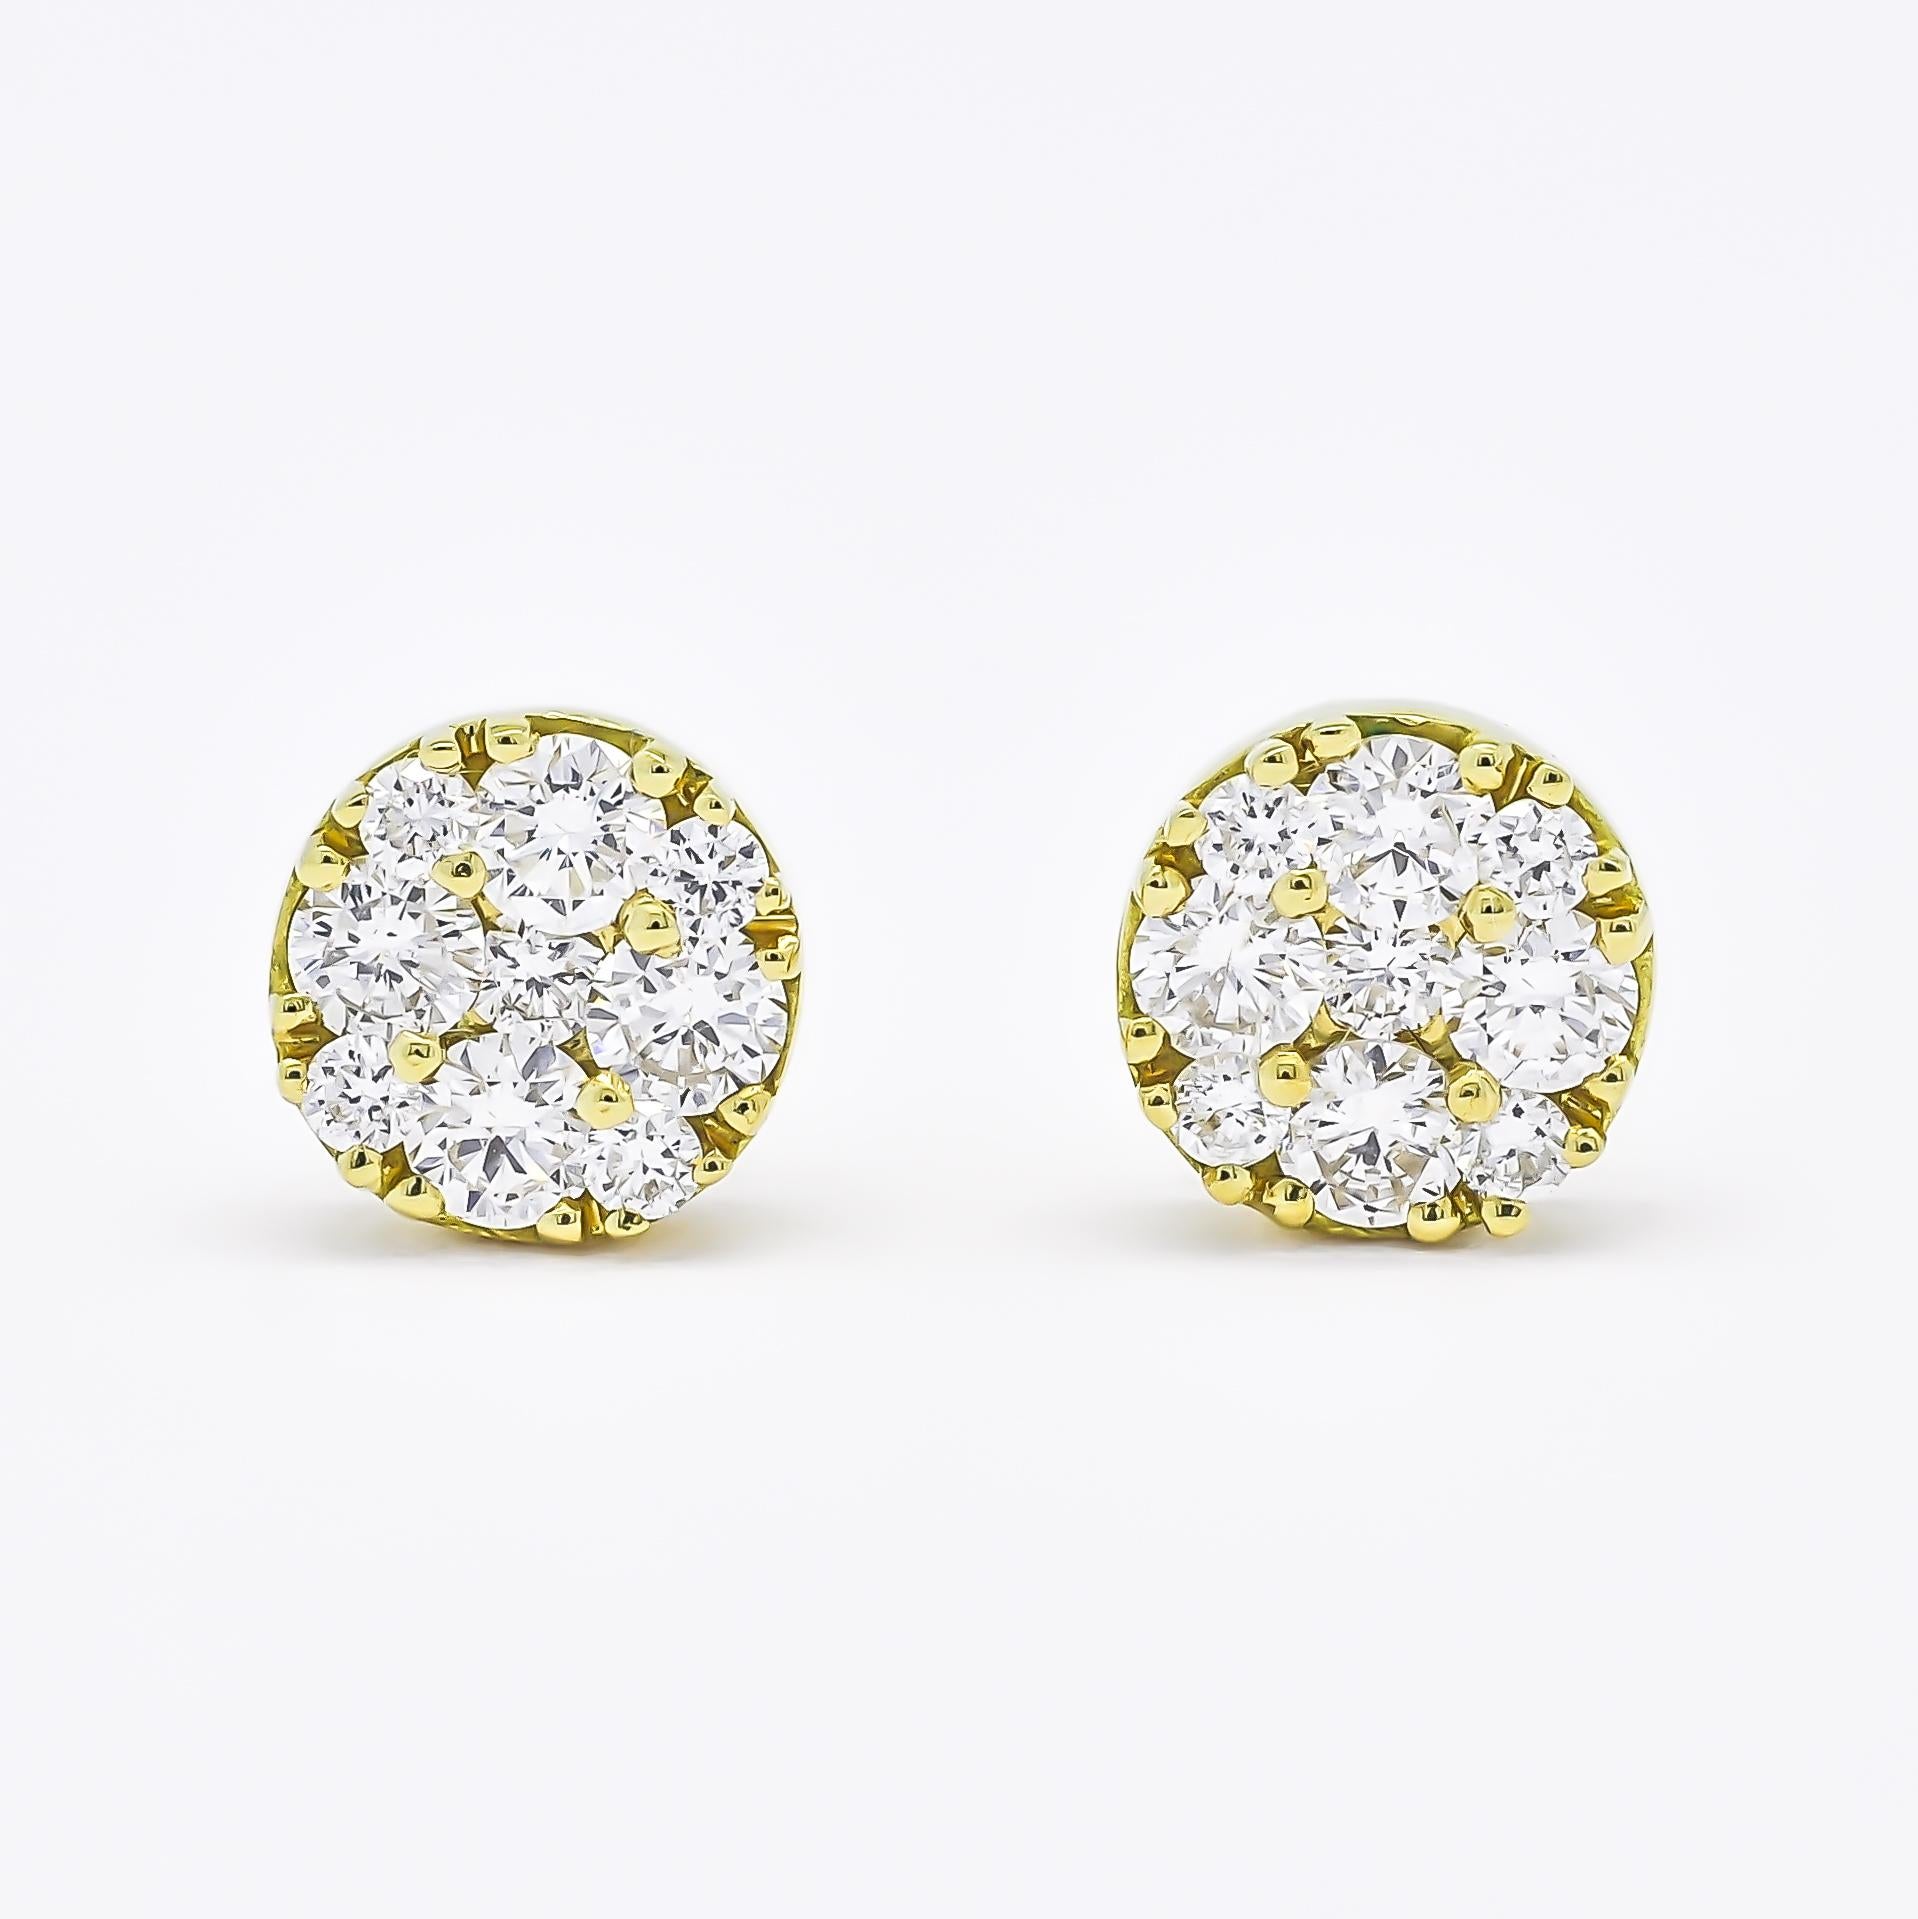 Introducing the epitome of modern elegance - the Solitaire Round Cluster Stud earrings. These perfectly balanced pieces not only showcase your sense of refinement and class but also embody a contemporary sophistication that sets you apart.

The